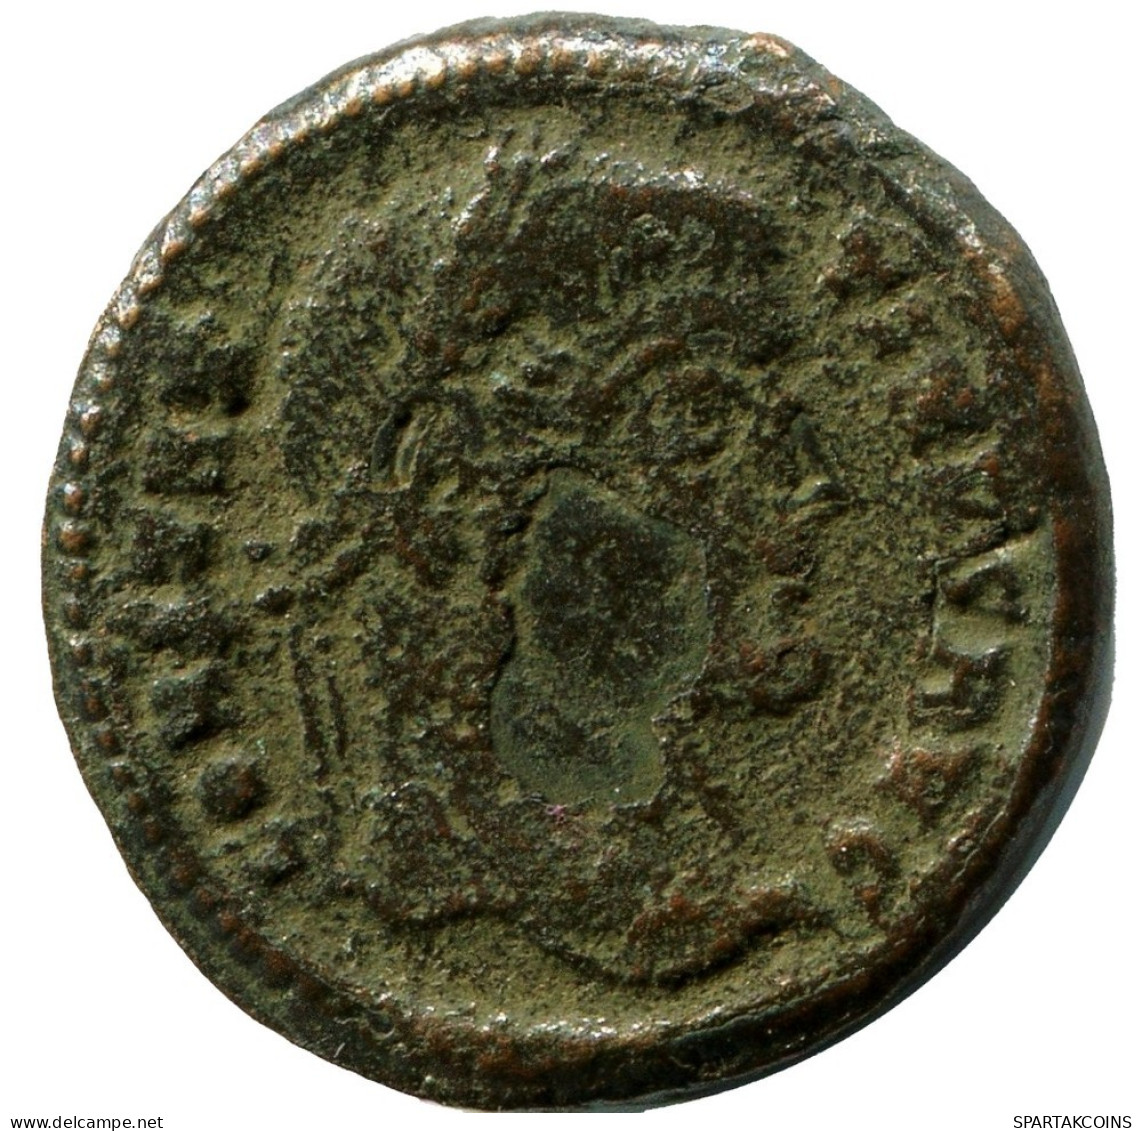 CONSTANTINE I MINTED IN CYZICUS FROM THE ROYAL ONTARIO MUSEUM #ANC10953.14.U.A - El Impero Christiano (307 / 363)